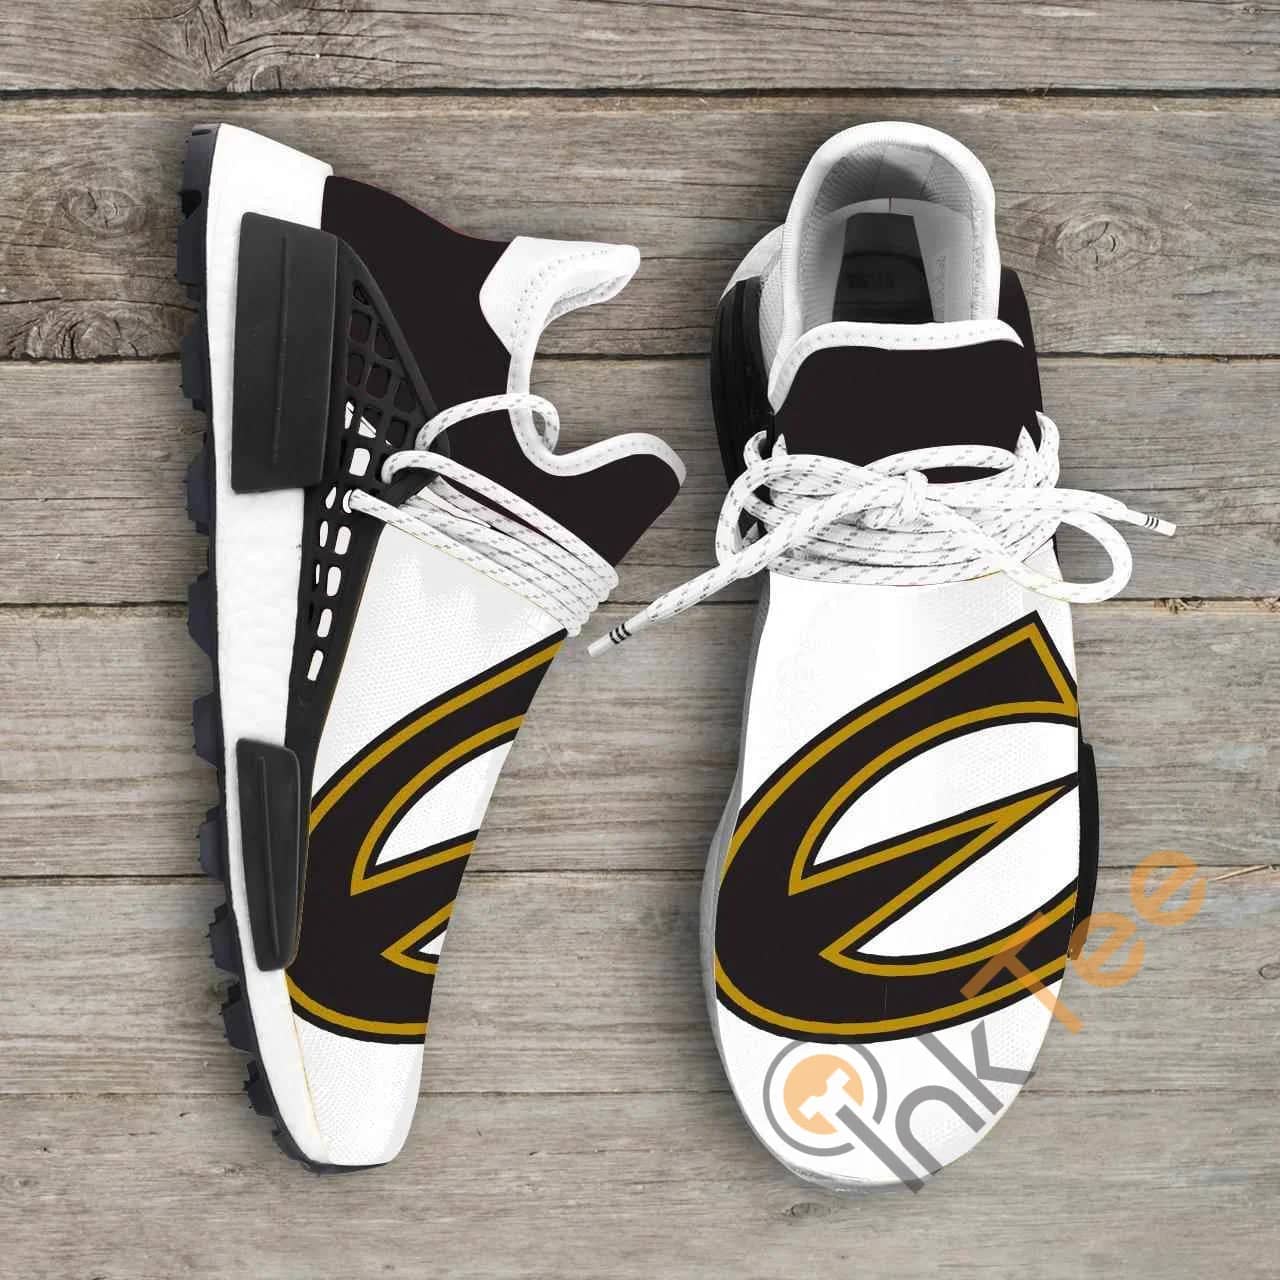 Emporia State Hornet Ncaa Nmd Human Shoes